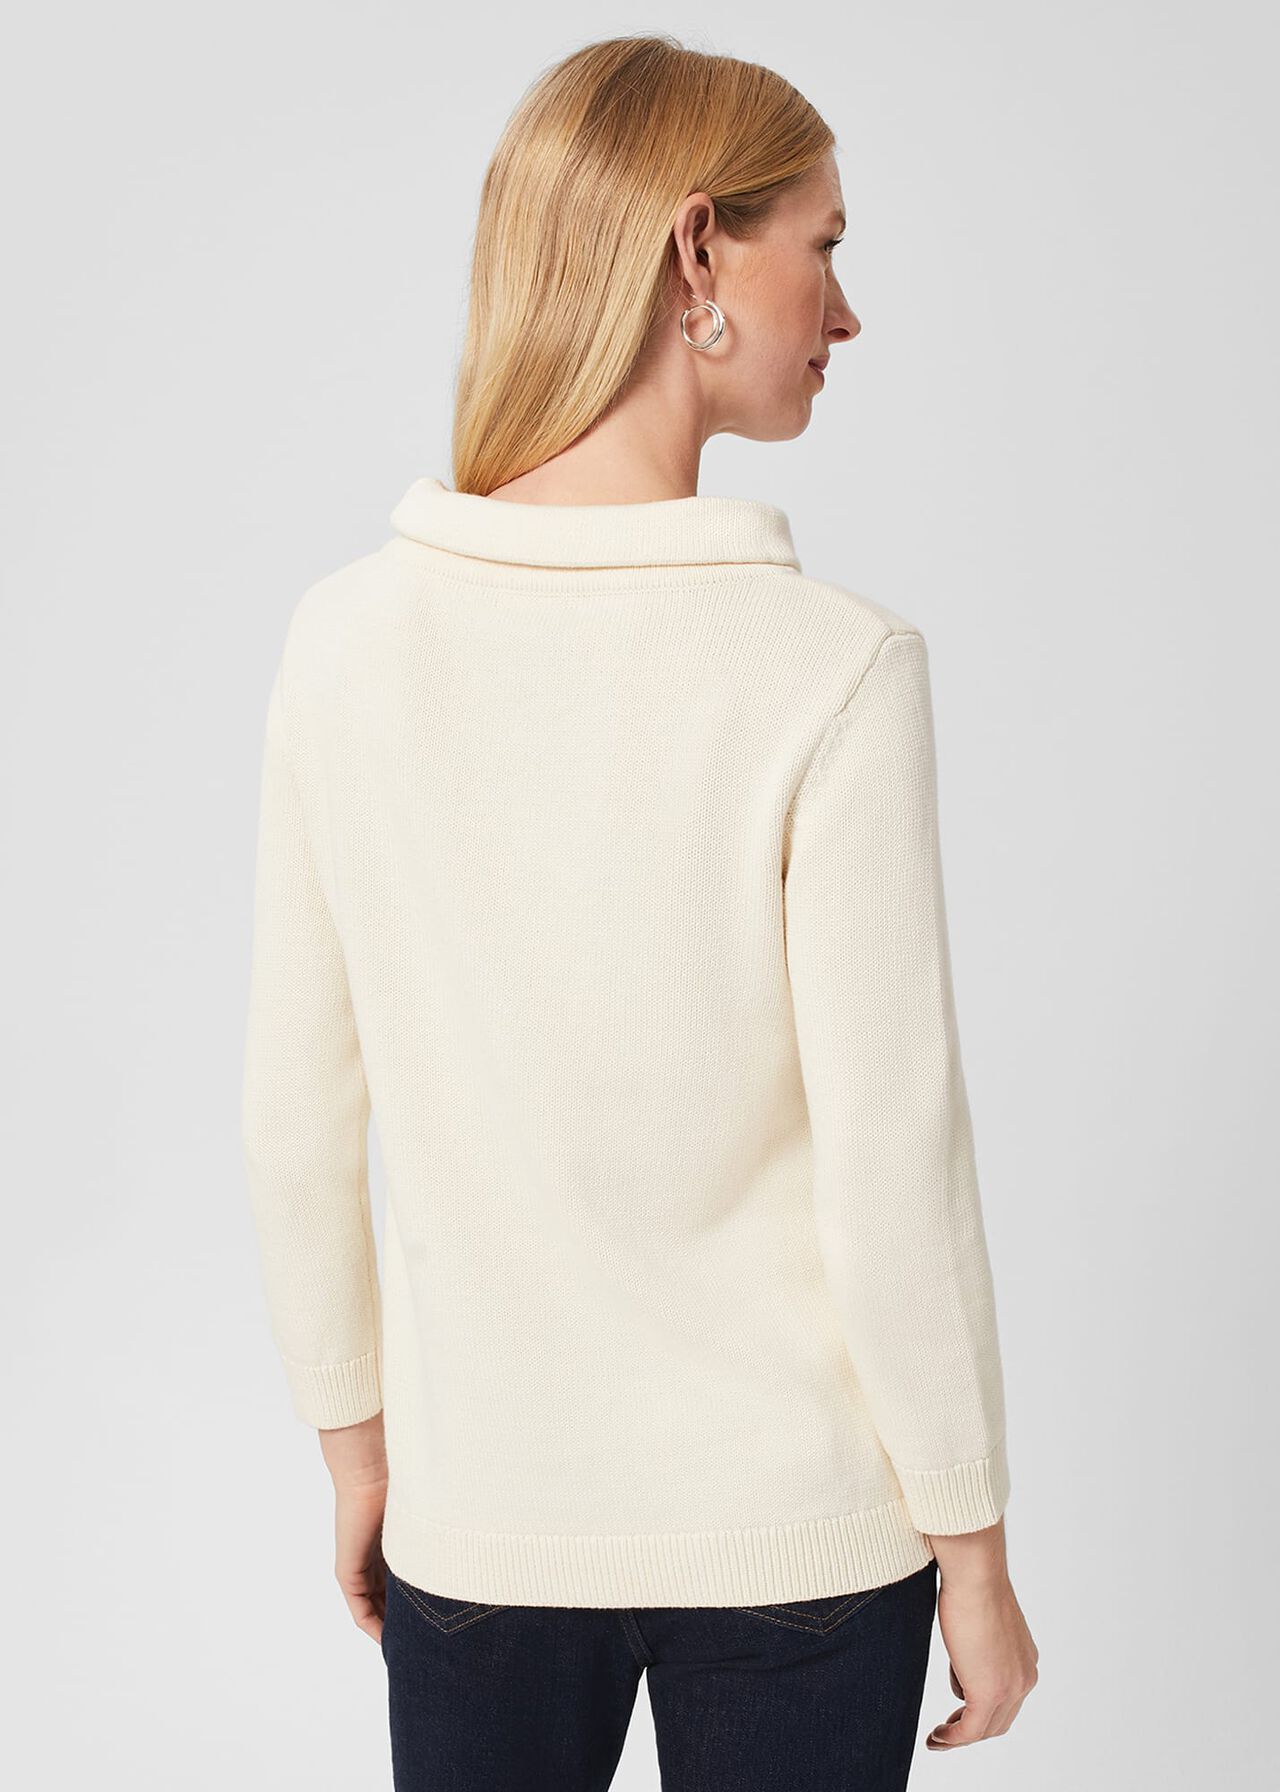 Camilla Cable Cotton Sweater, Ivory, hi-res